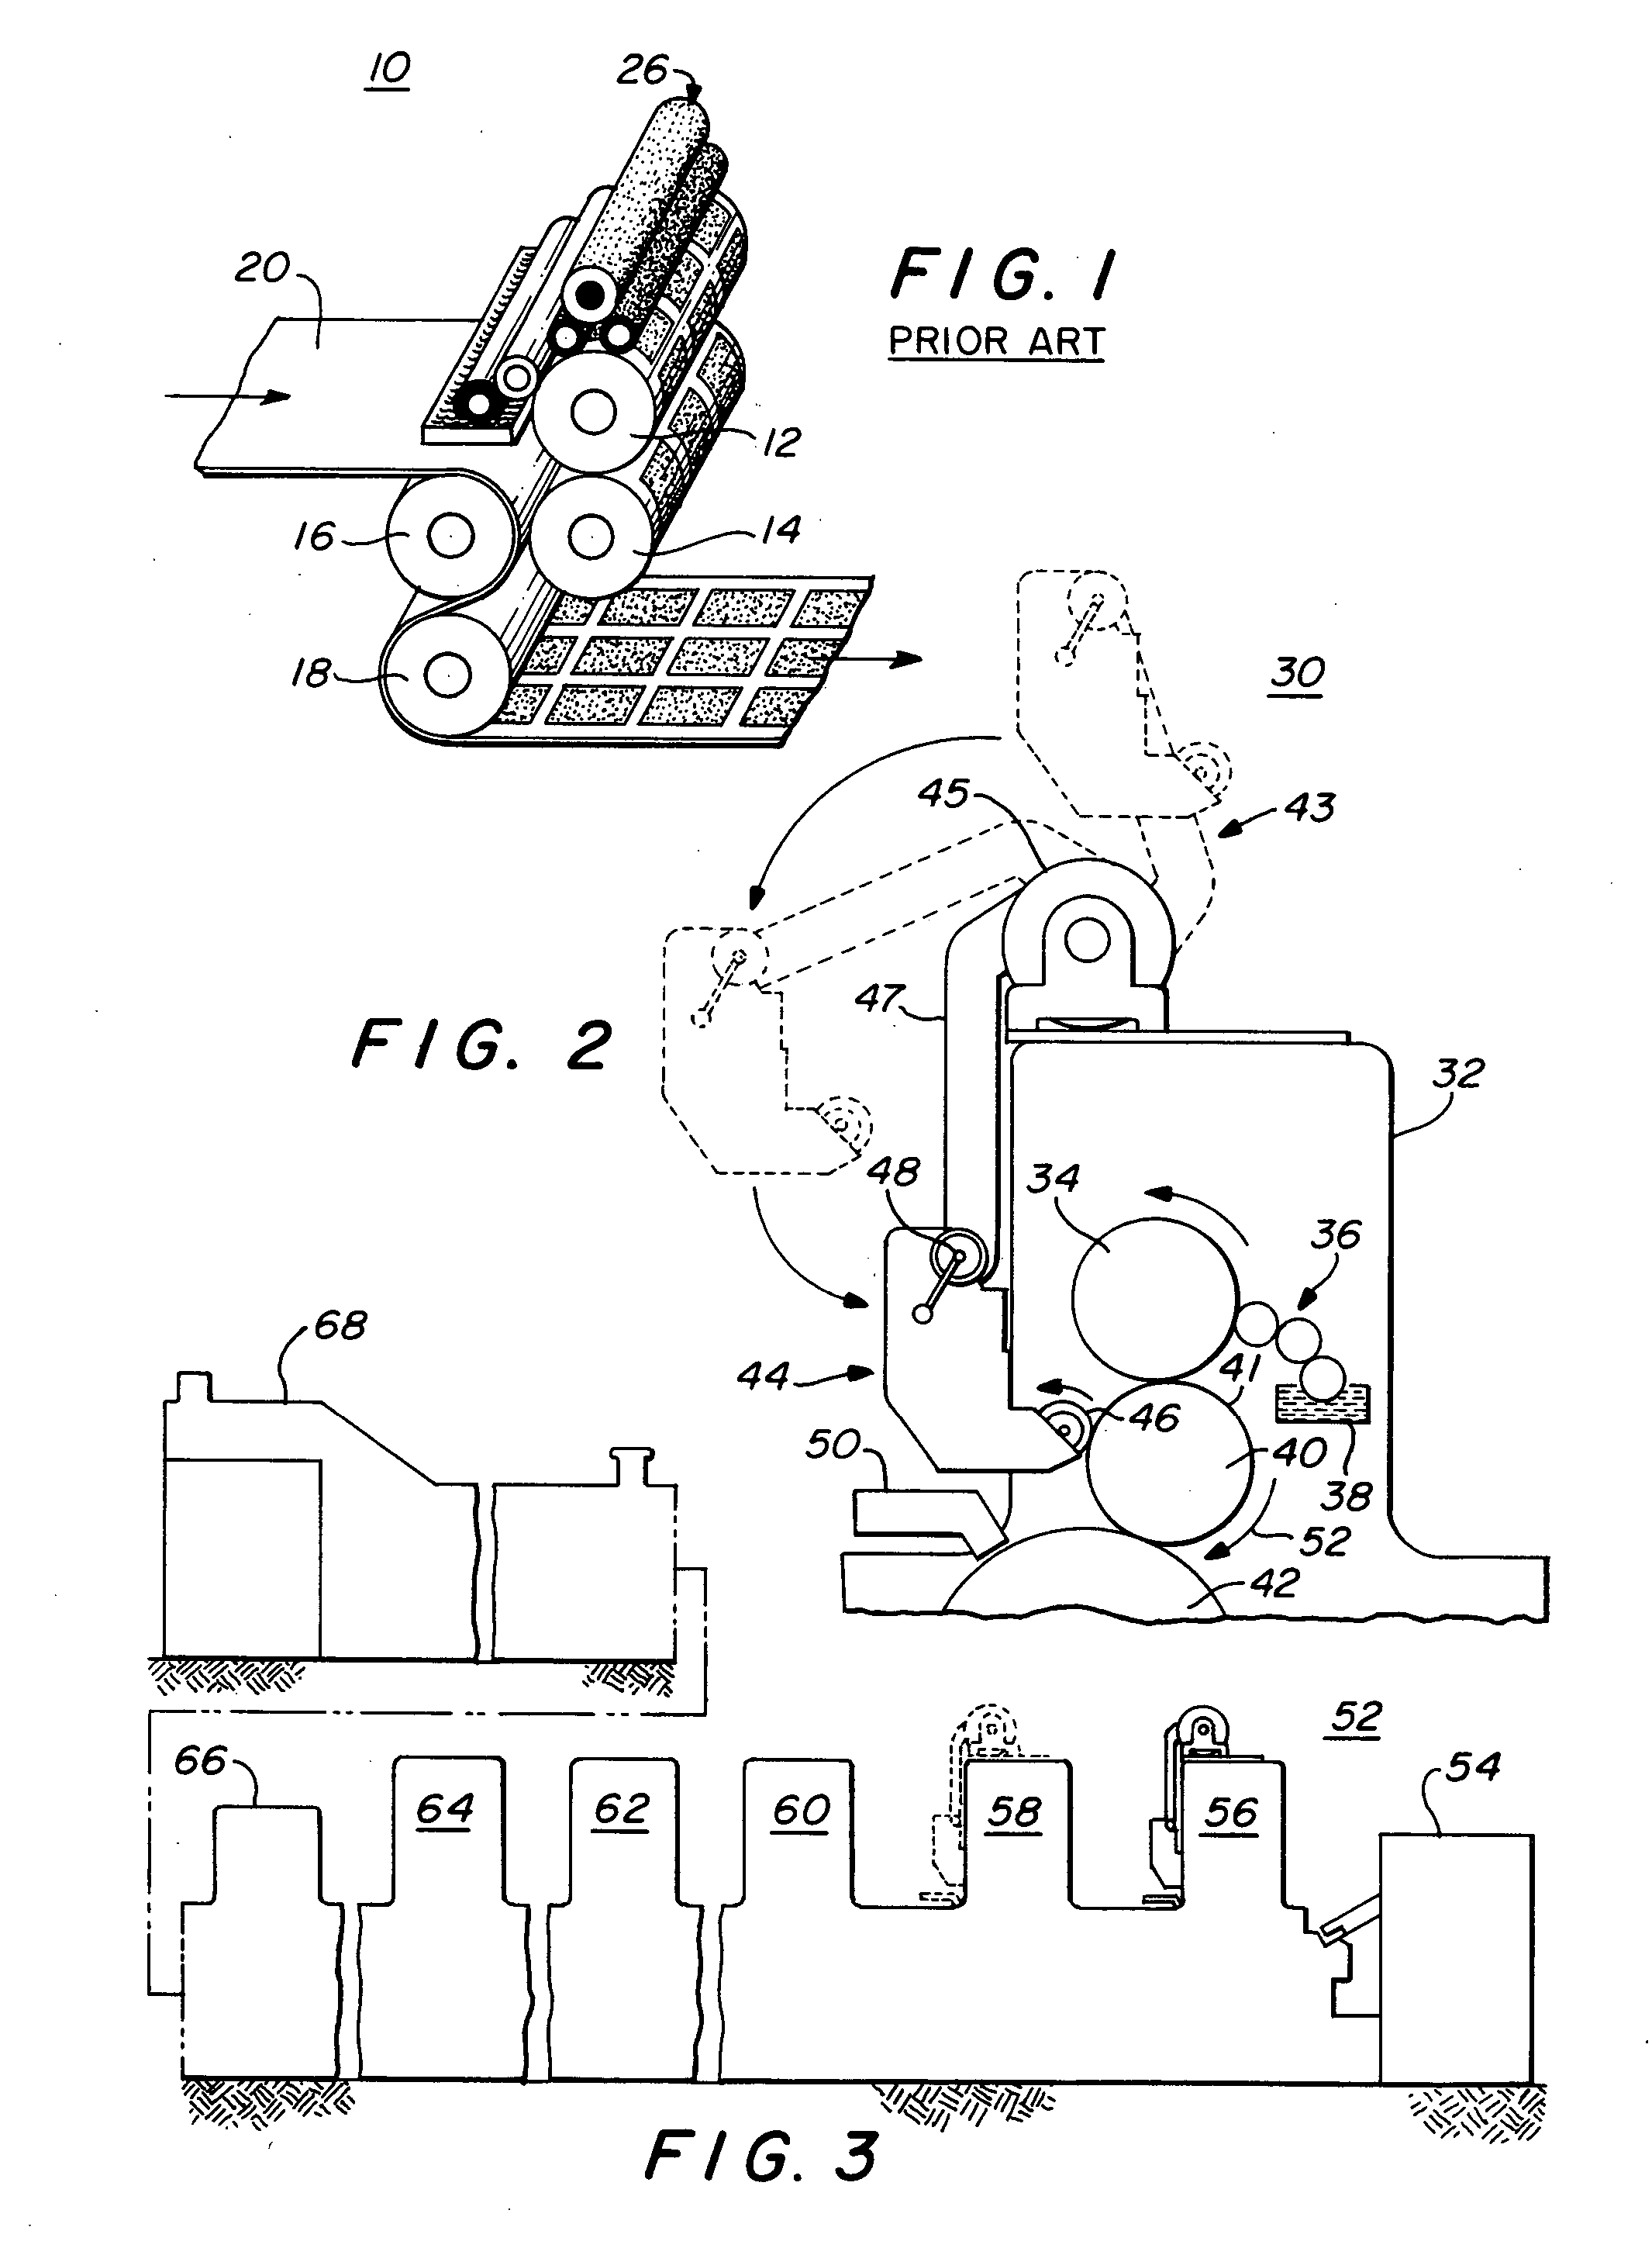 Combined lithographic/flexographic printing apparatus and process